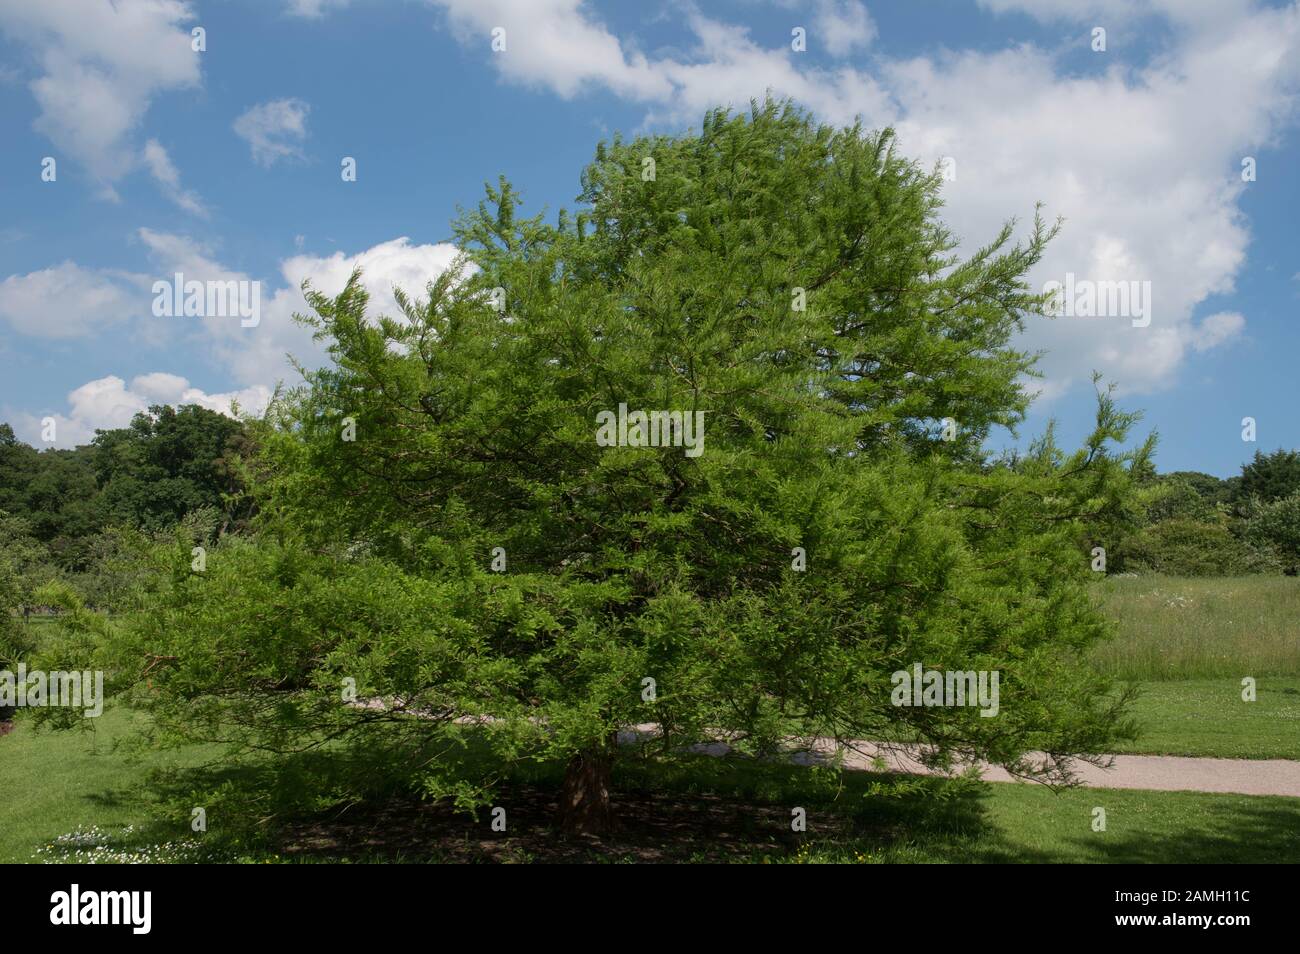 Spring Foliage of the Decidous Conifer Bald or Swamp Cypress Tree (Taxodium distichum) in a Park Stock Photo